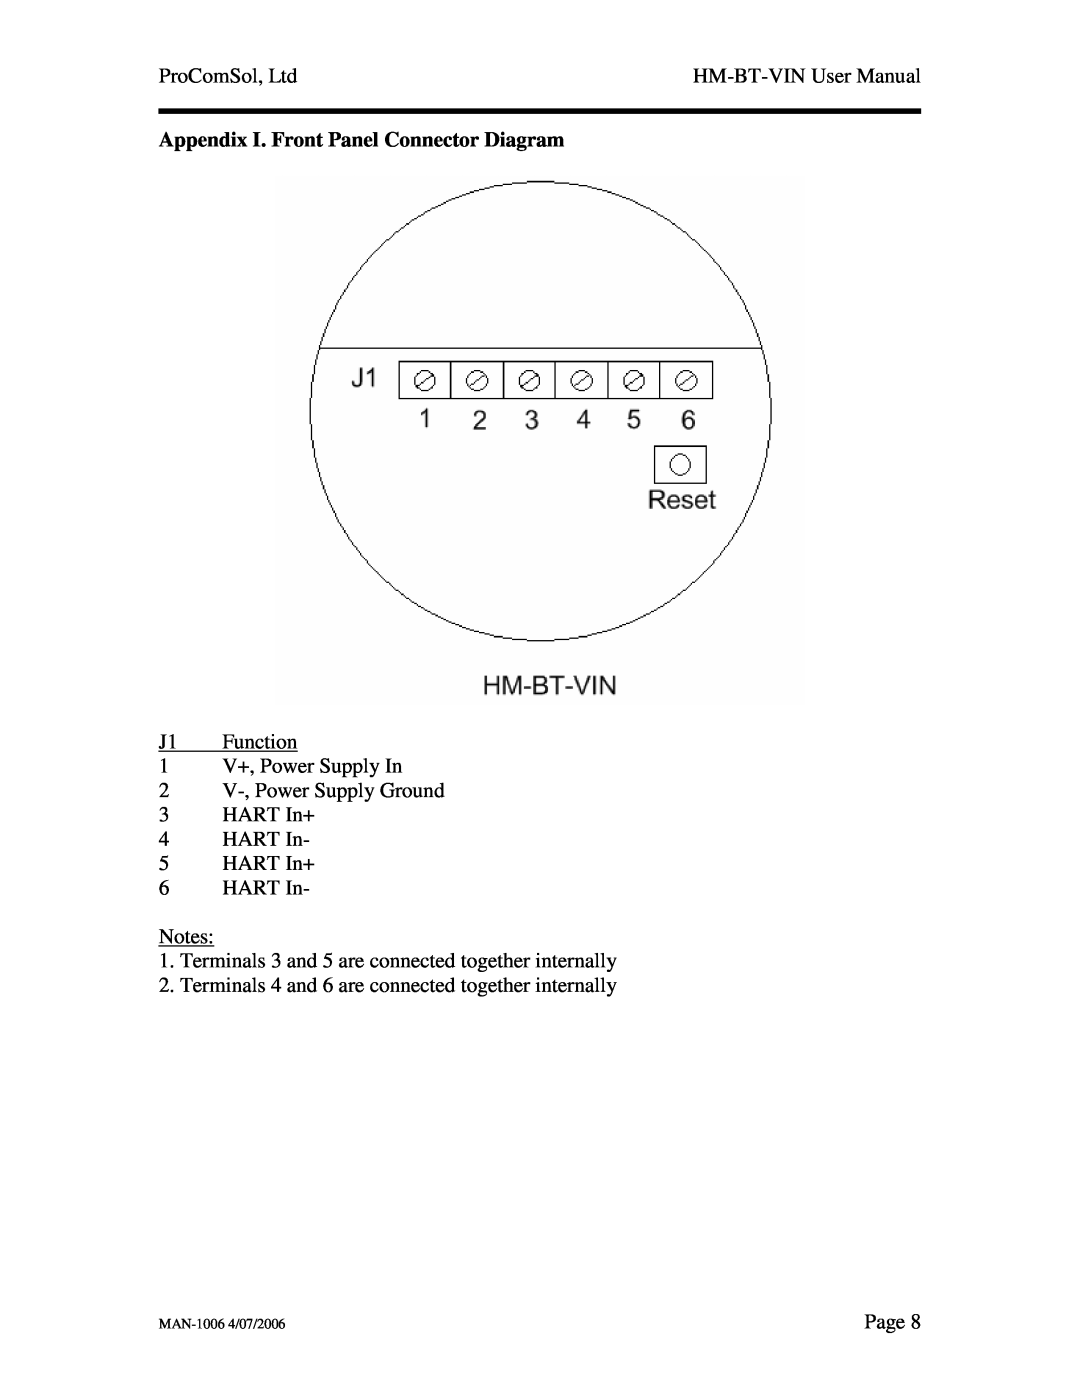 Linksys Appendix I. Front Panel Connector Diagram, HM-BT-VIN User Manual, HART In+ 4 HART In 5 HART In+ 6 HART In, Page 